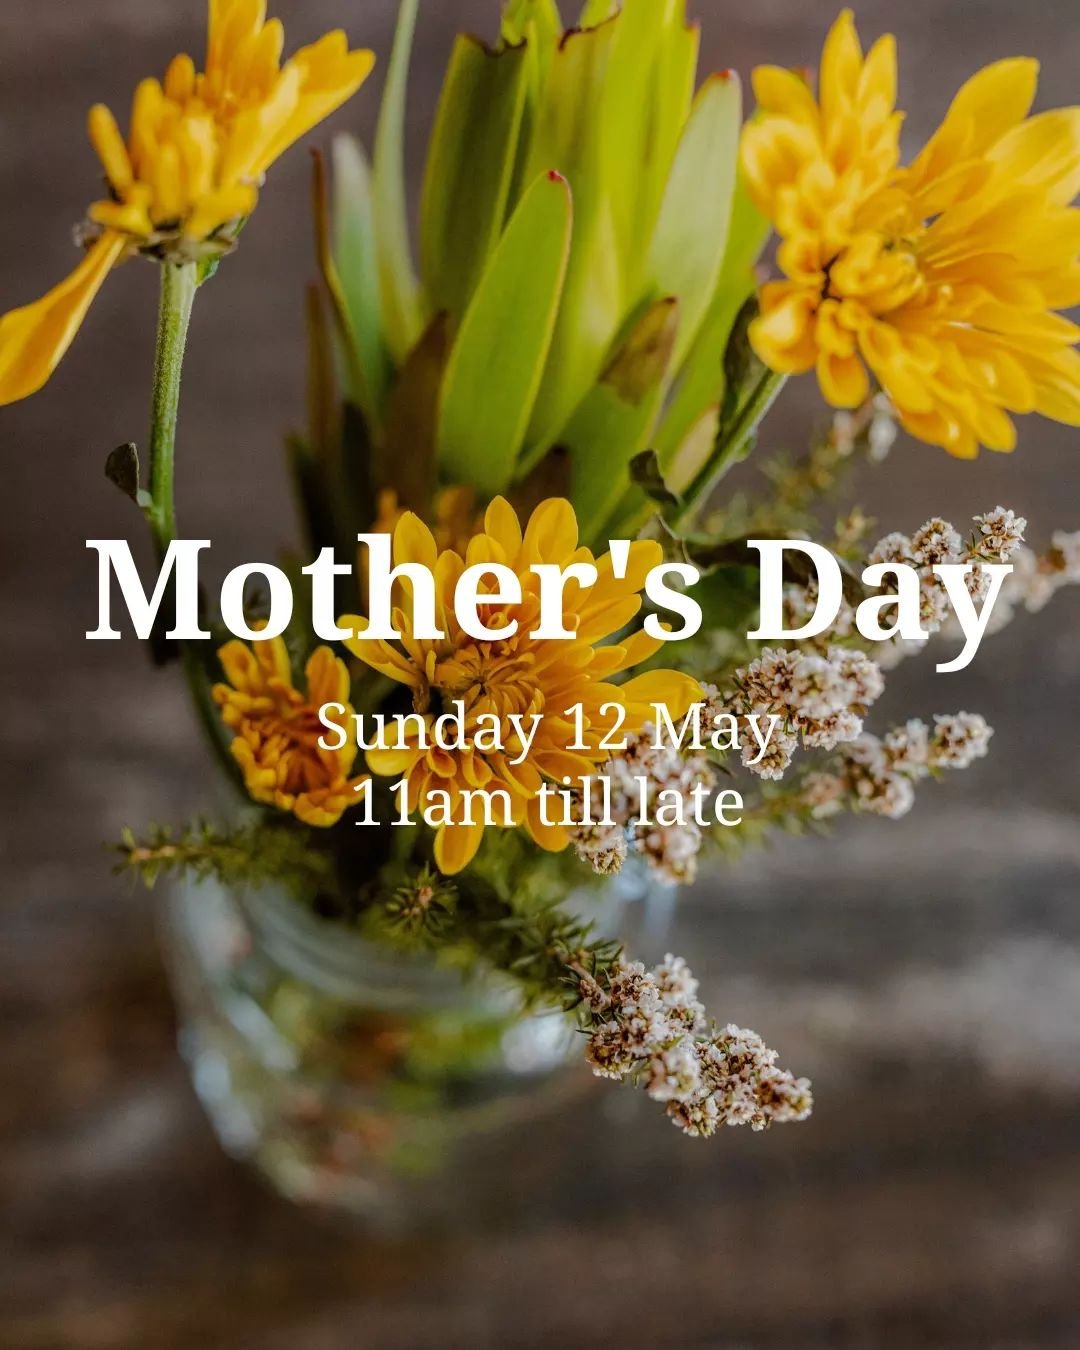 Join us at Sauma this Mother&rsquo;s Day!

We have created a very special Mother&rsquo;s Day Menu to celebrate all the incredible mothers and mother figures who make our world go round.

Sunday 12 May
Lunch 11am &ndash; 2.30pm | Dinner 5pm - 10pm
Mot